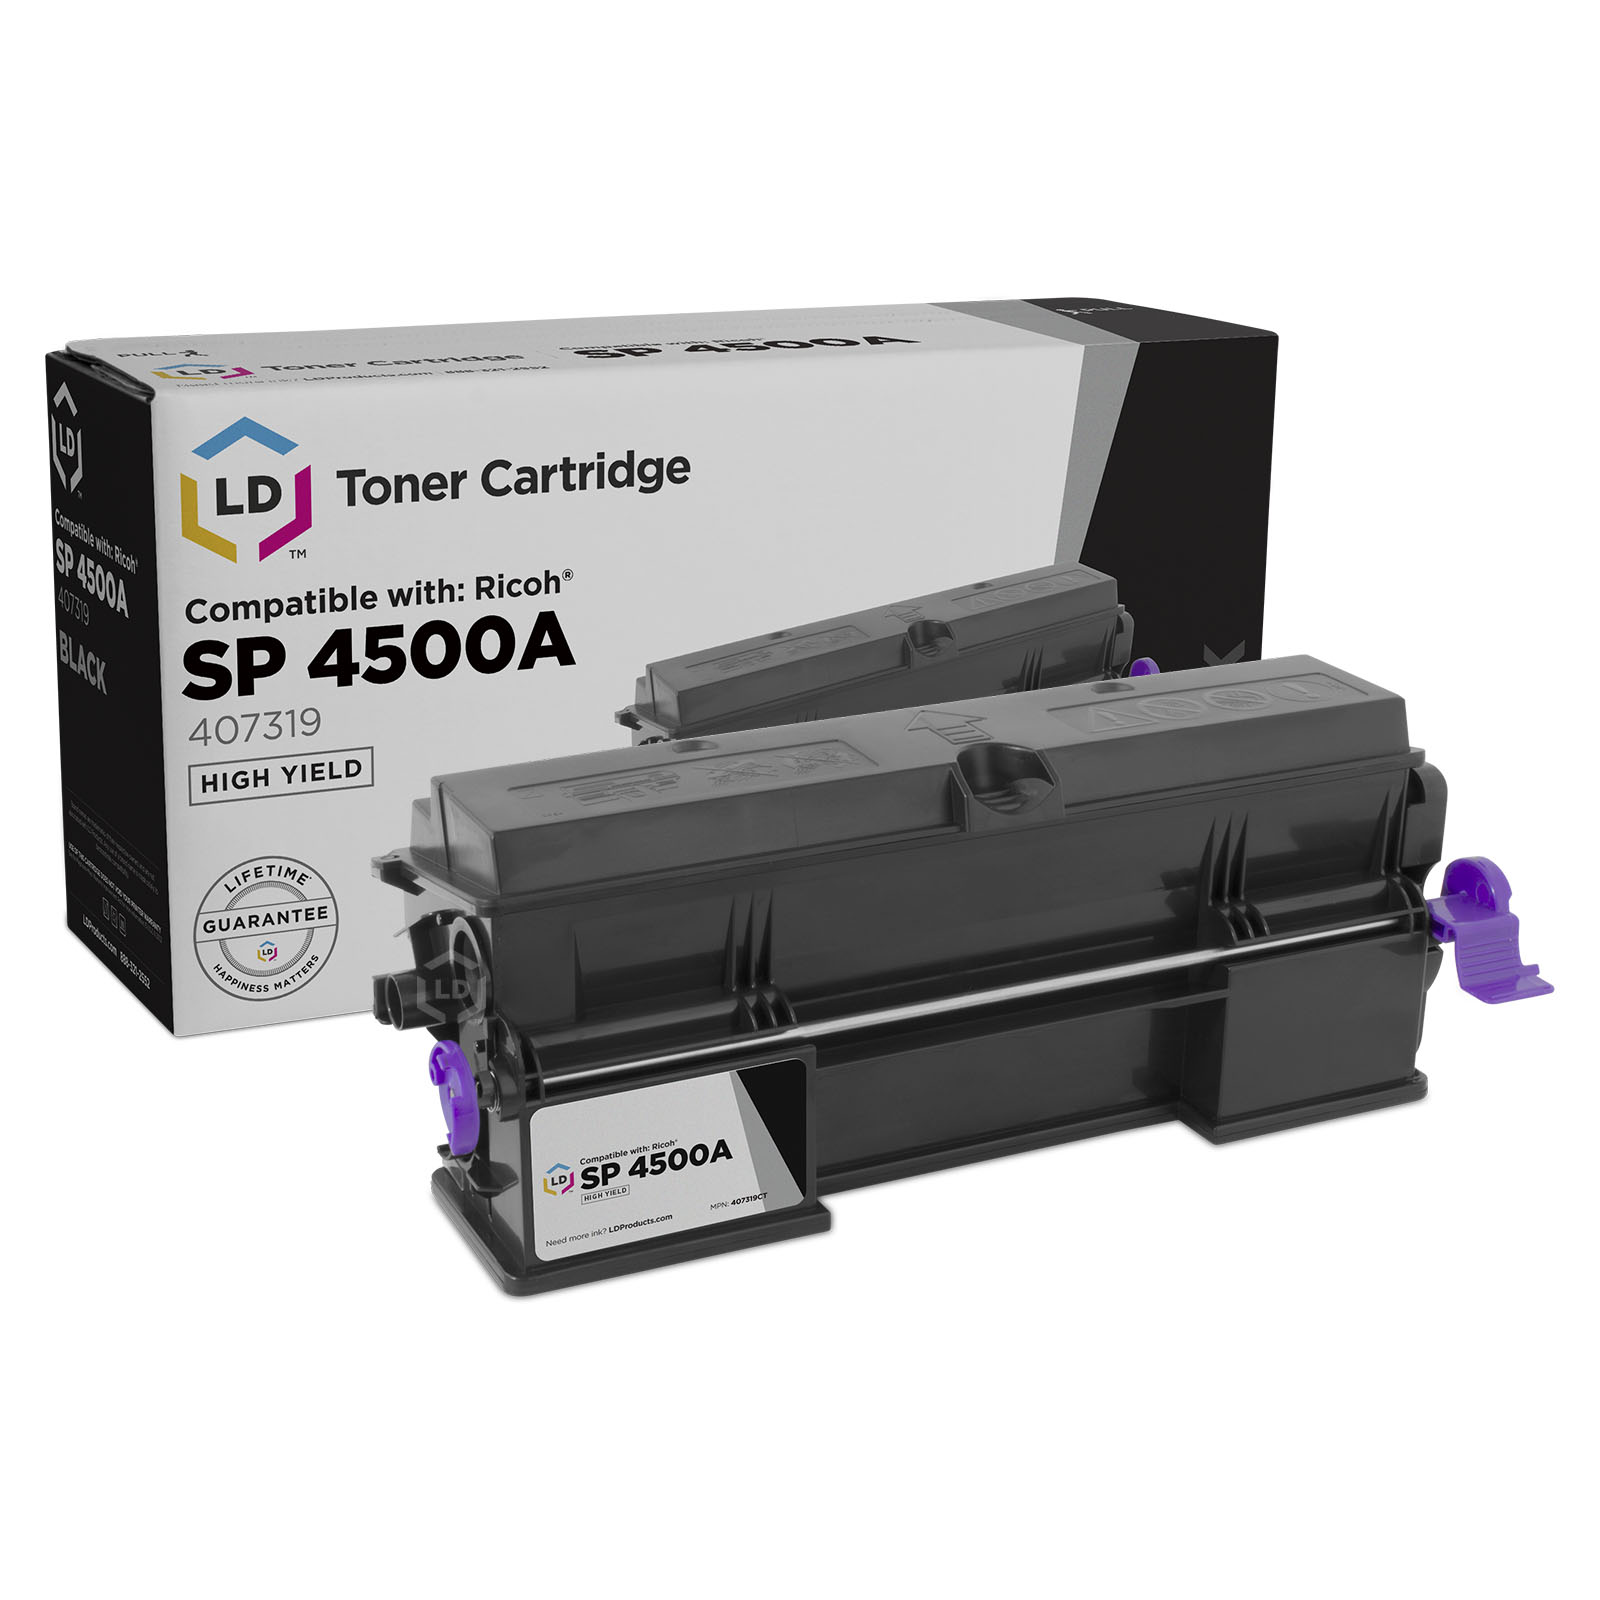 LD Compatible Ricoh 407319 / SP 4500A Set of 3 High Yield Black Toner Cartridges for use in SP 3600DN, SP 3600SF, SP 3610SF, SP 4510DN, SP 4510SF & MP 401SPF (6,000 Page Yield) - image 2 of 2